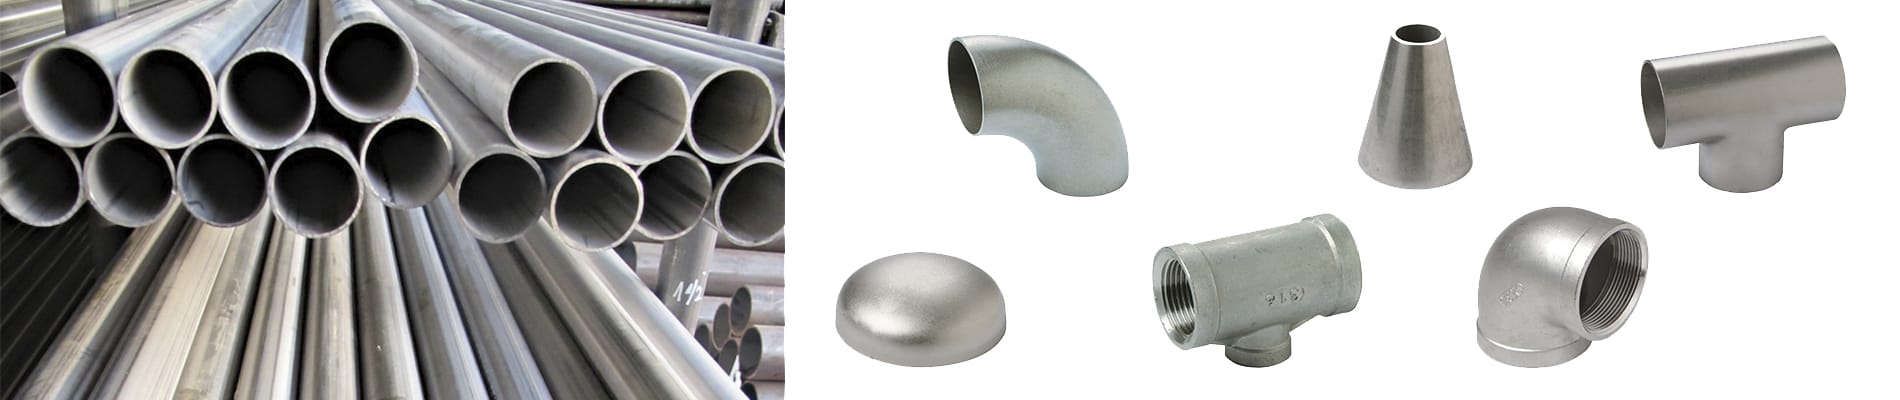 Stainless steel tubes and accessories